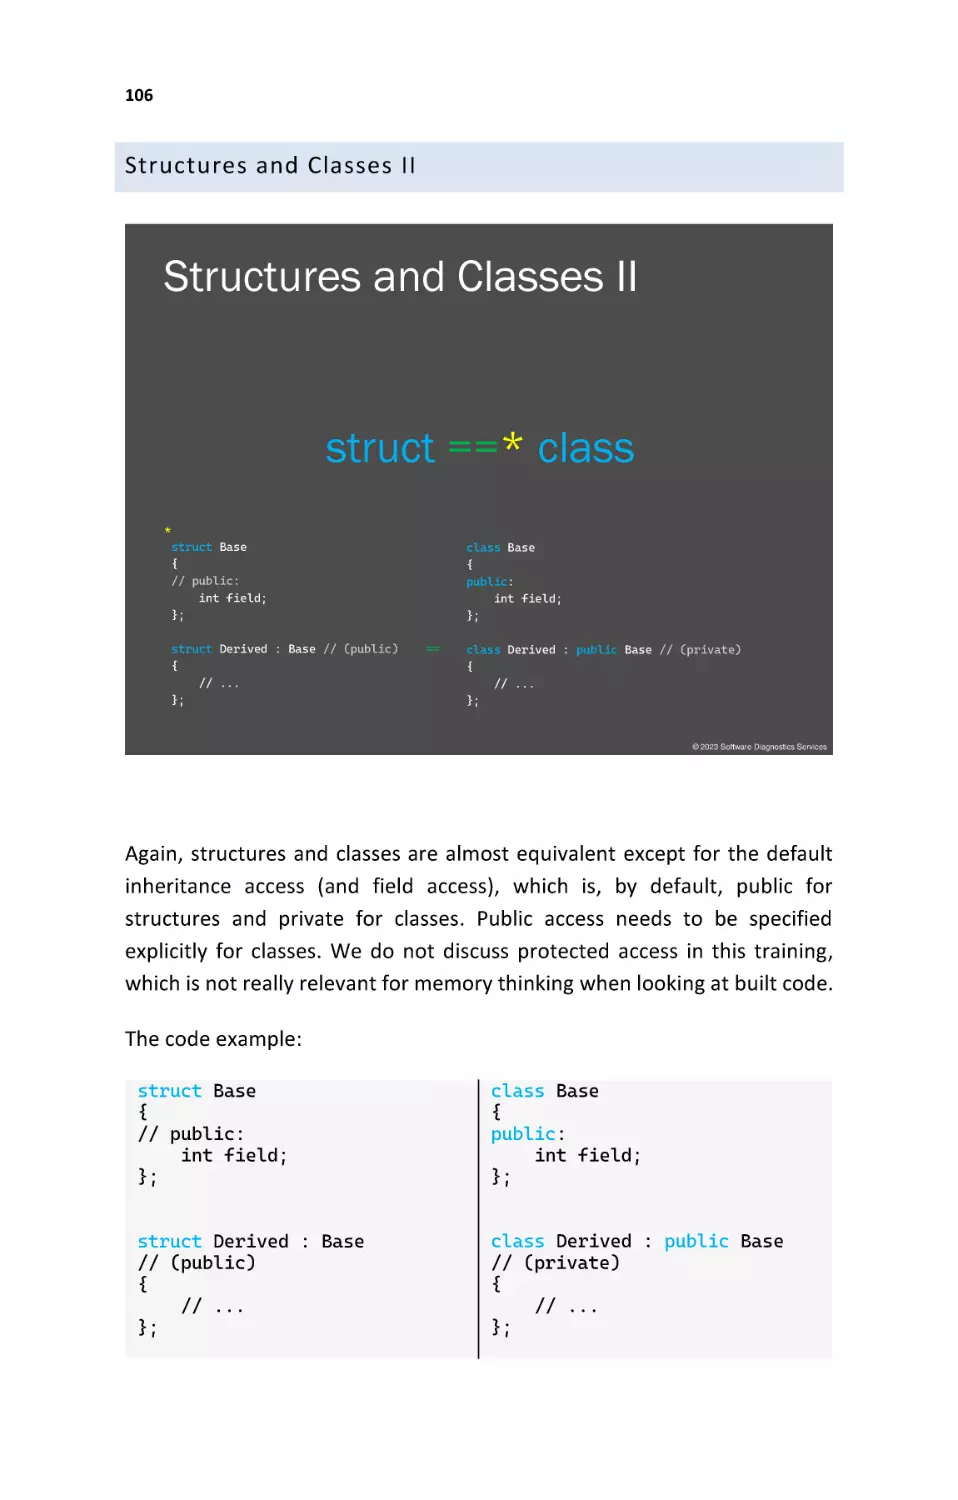 Structures and Classes II